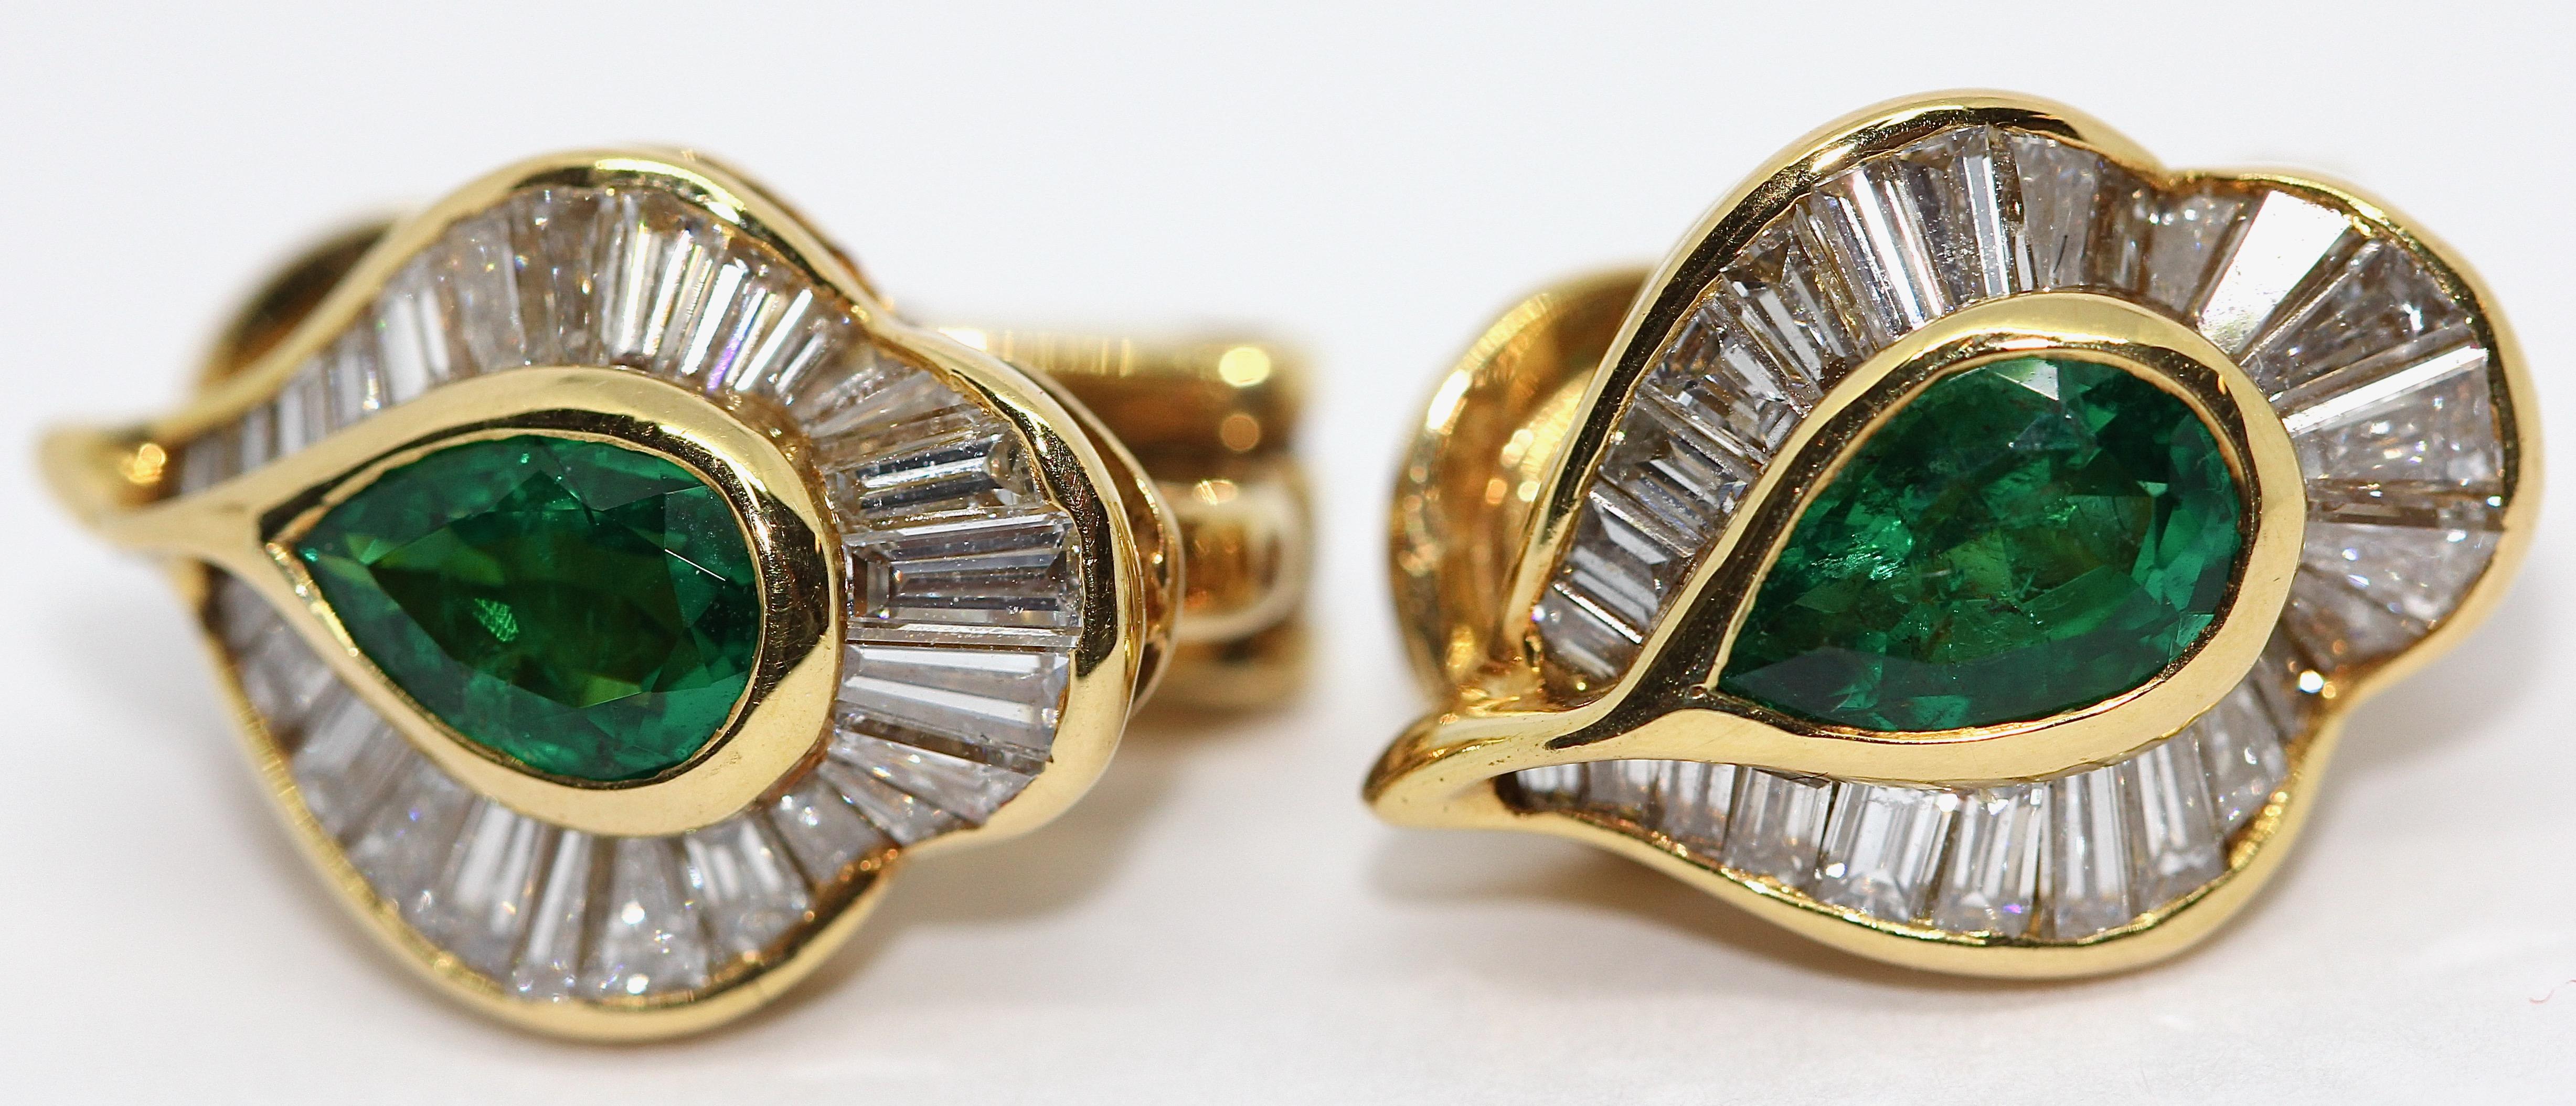 Original Emerald Stud Earrings with 55 Diamonds, by Hans Stern, 18 Karat Gold.

Pair of earrings in 18K yellow gold, set with two emeralds of 1.00 carat and 55 diamonds of very good quality, total weight of 1.5 carats in baguette cut.
(Wesselton,